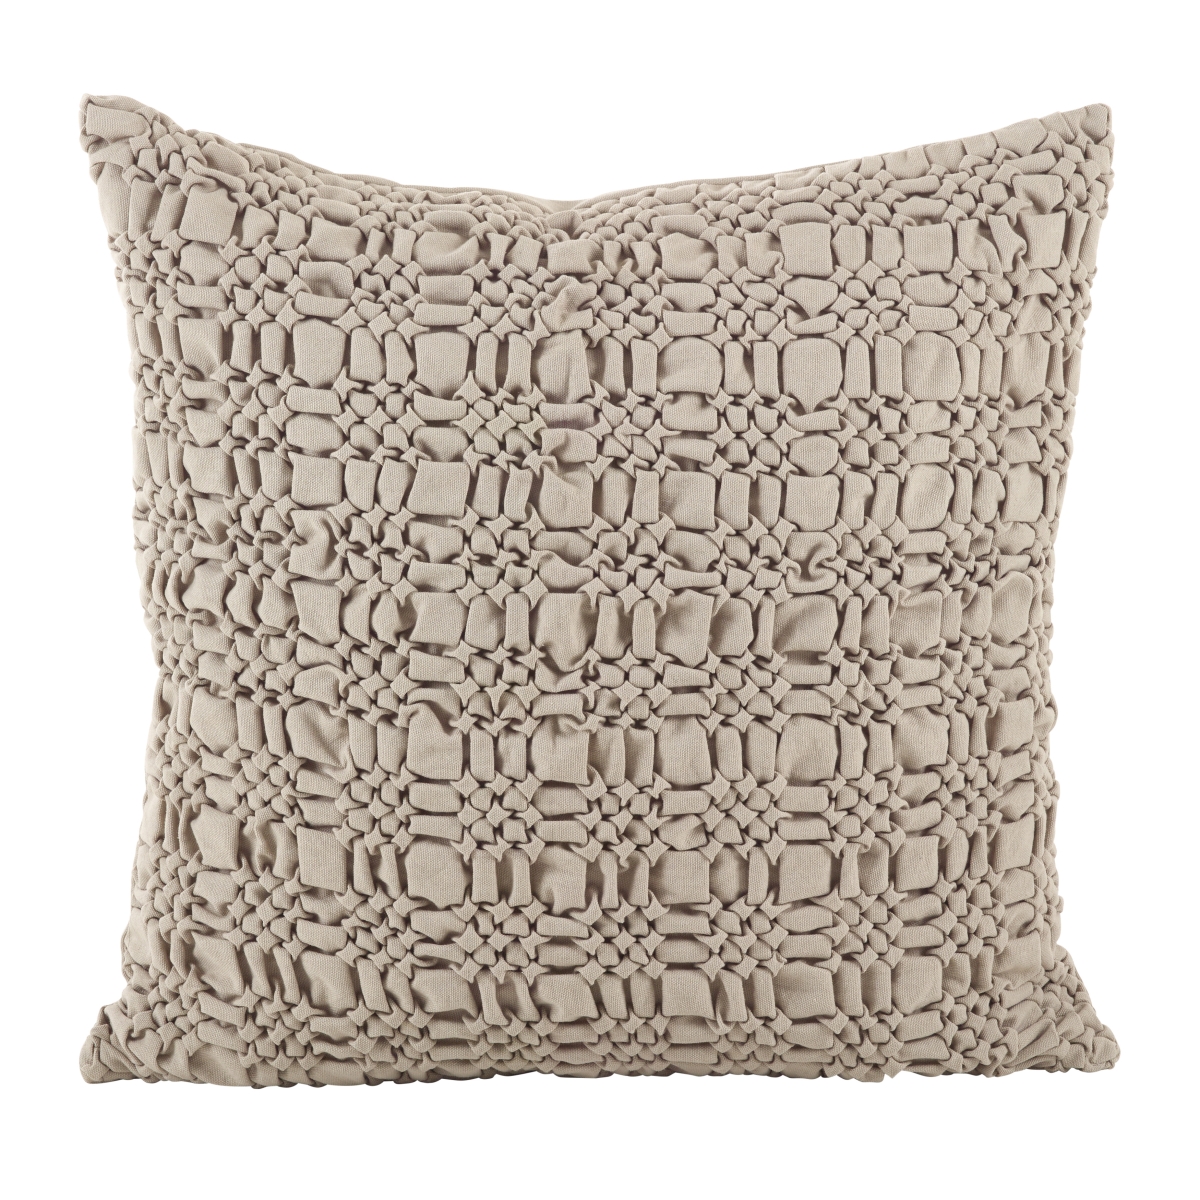 0002.t20s 20 In. Smocked Design Decorative Accent Cotton Down Filled Throw Pillow - Taupe